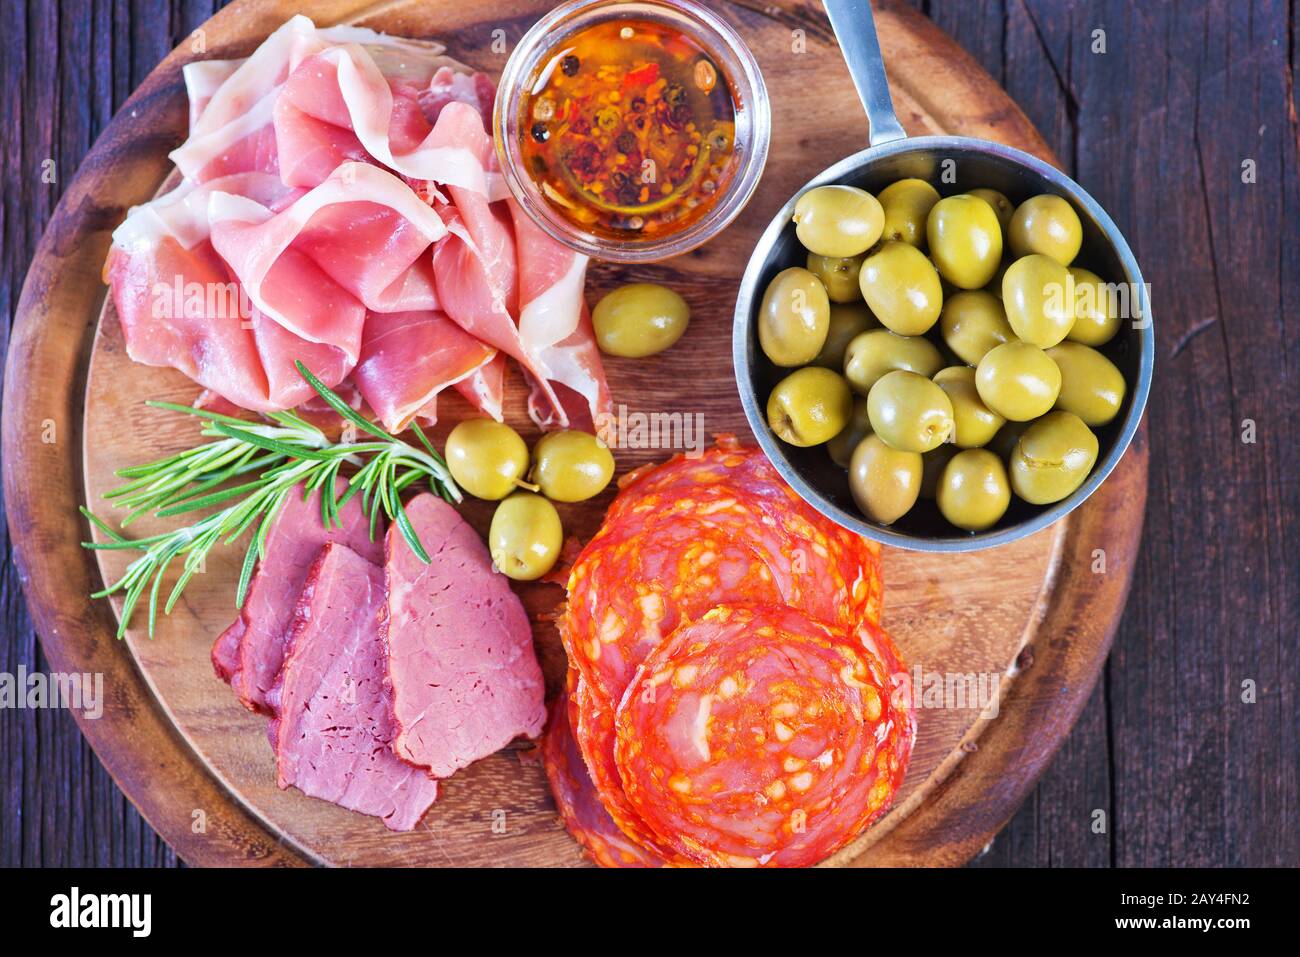 meat products Stock Photo